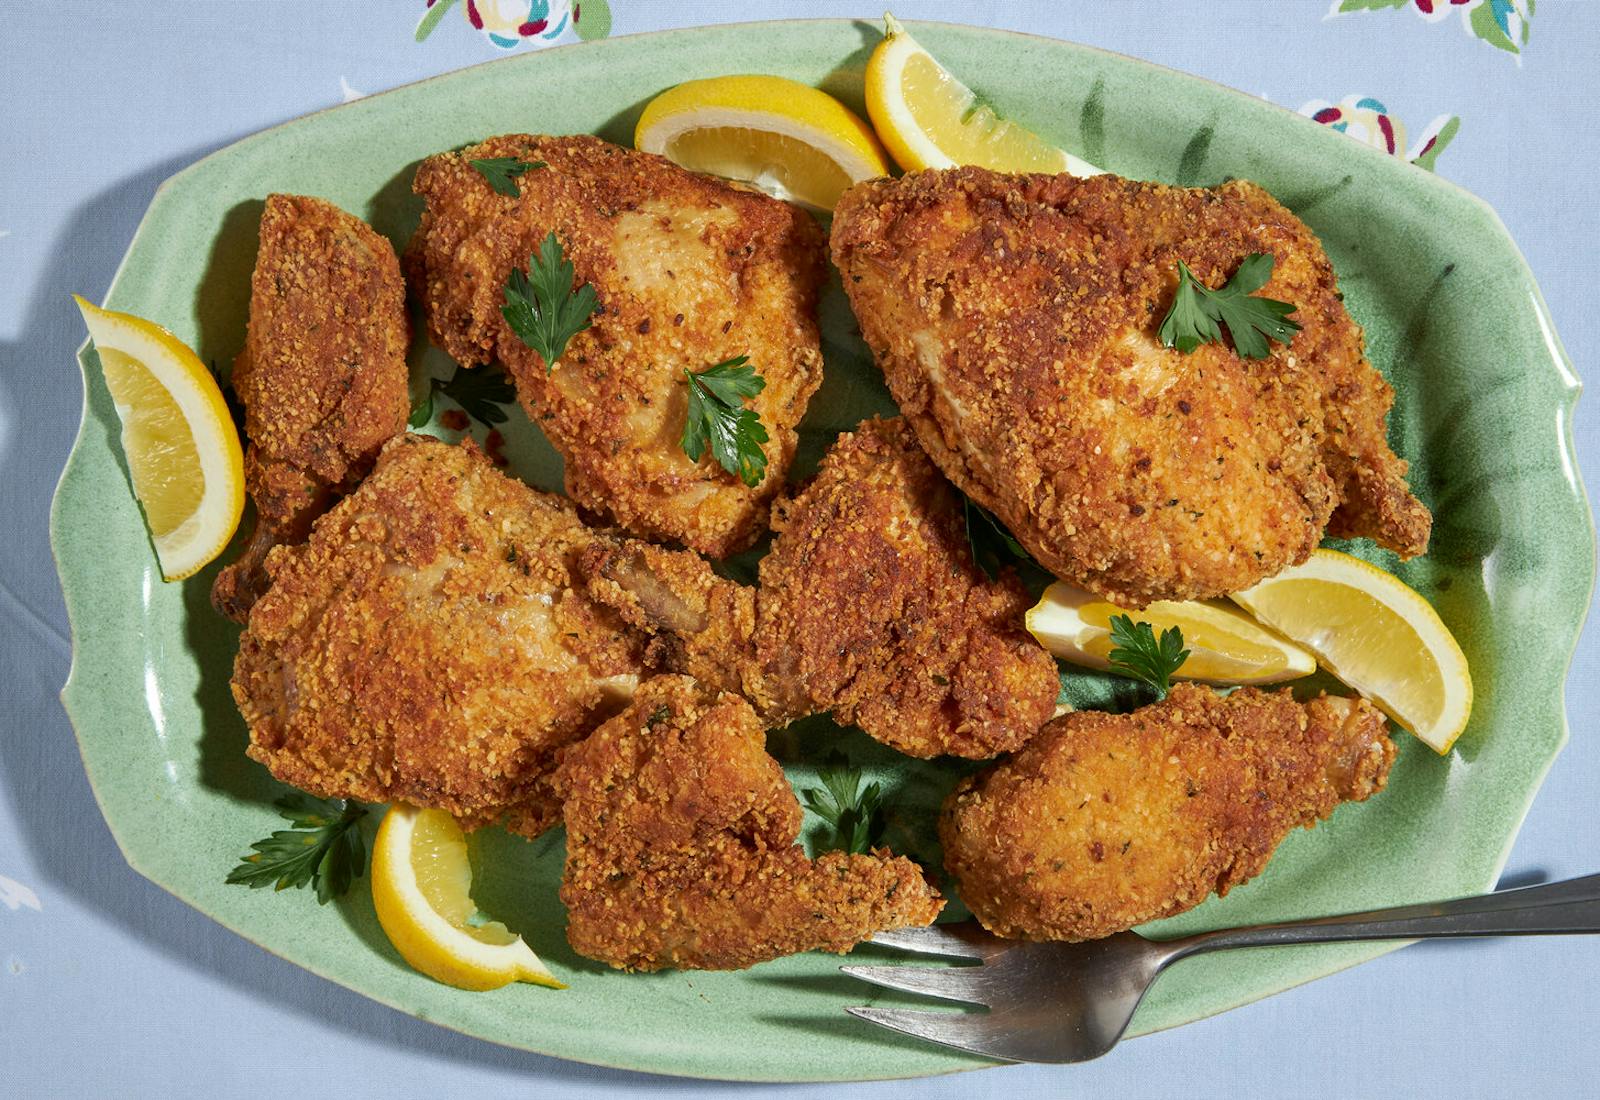 Fried chicken with parsley and lemon wedges on green platter, atop blue tablecloth. 